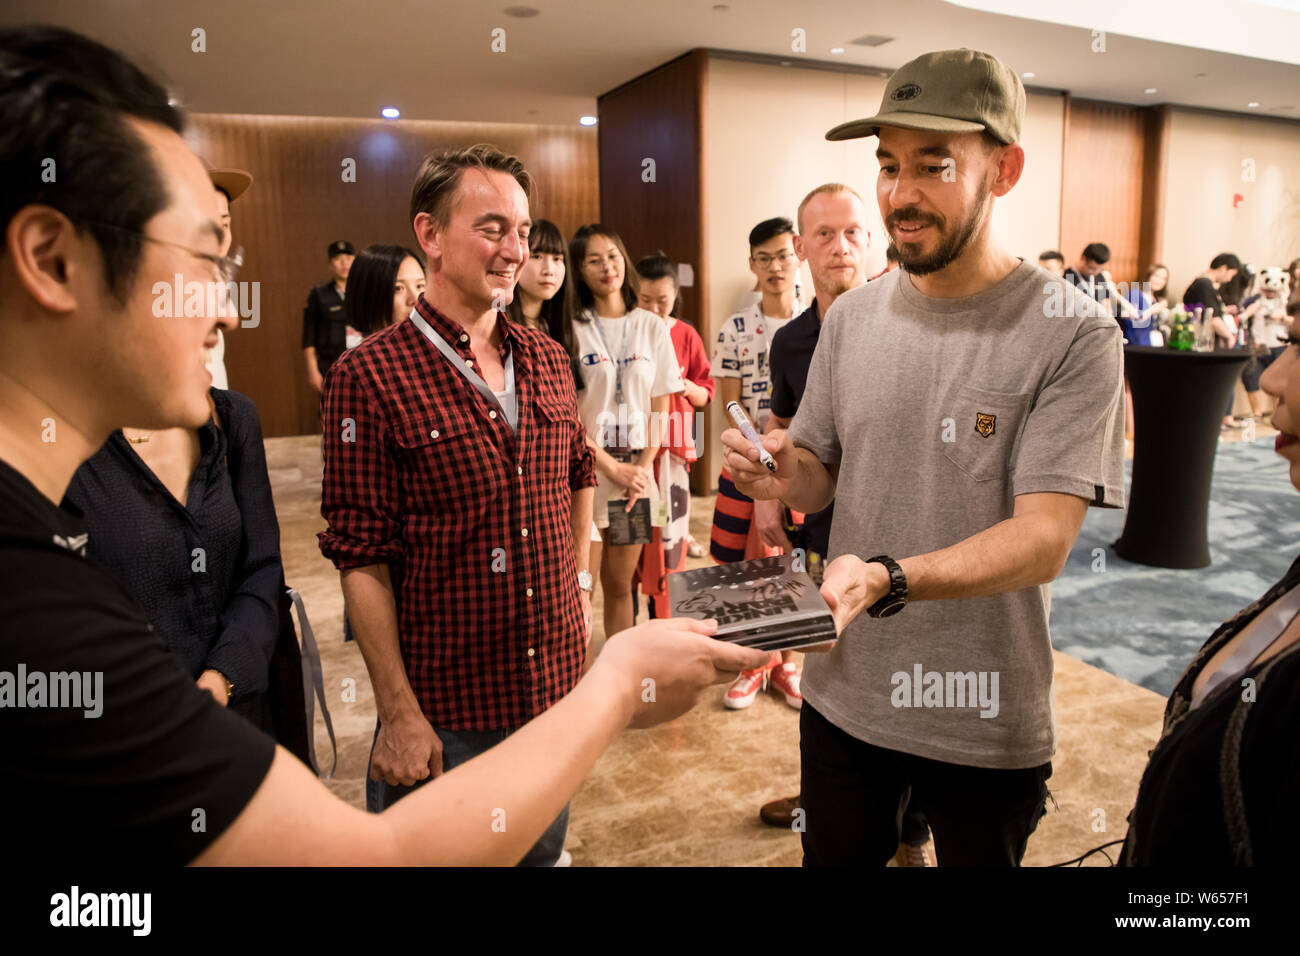 Singer Mike Shinoda of American rock band Linkin Park interacts with fans before a tour concert in Chengdu city, southwest China's Sichuan province, 1 Stock Photo